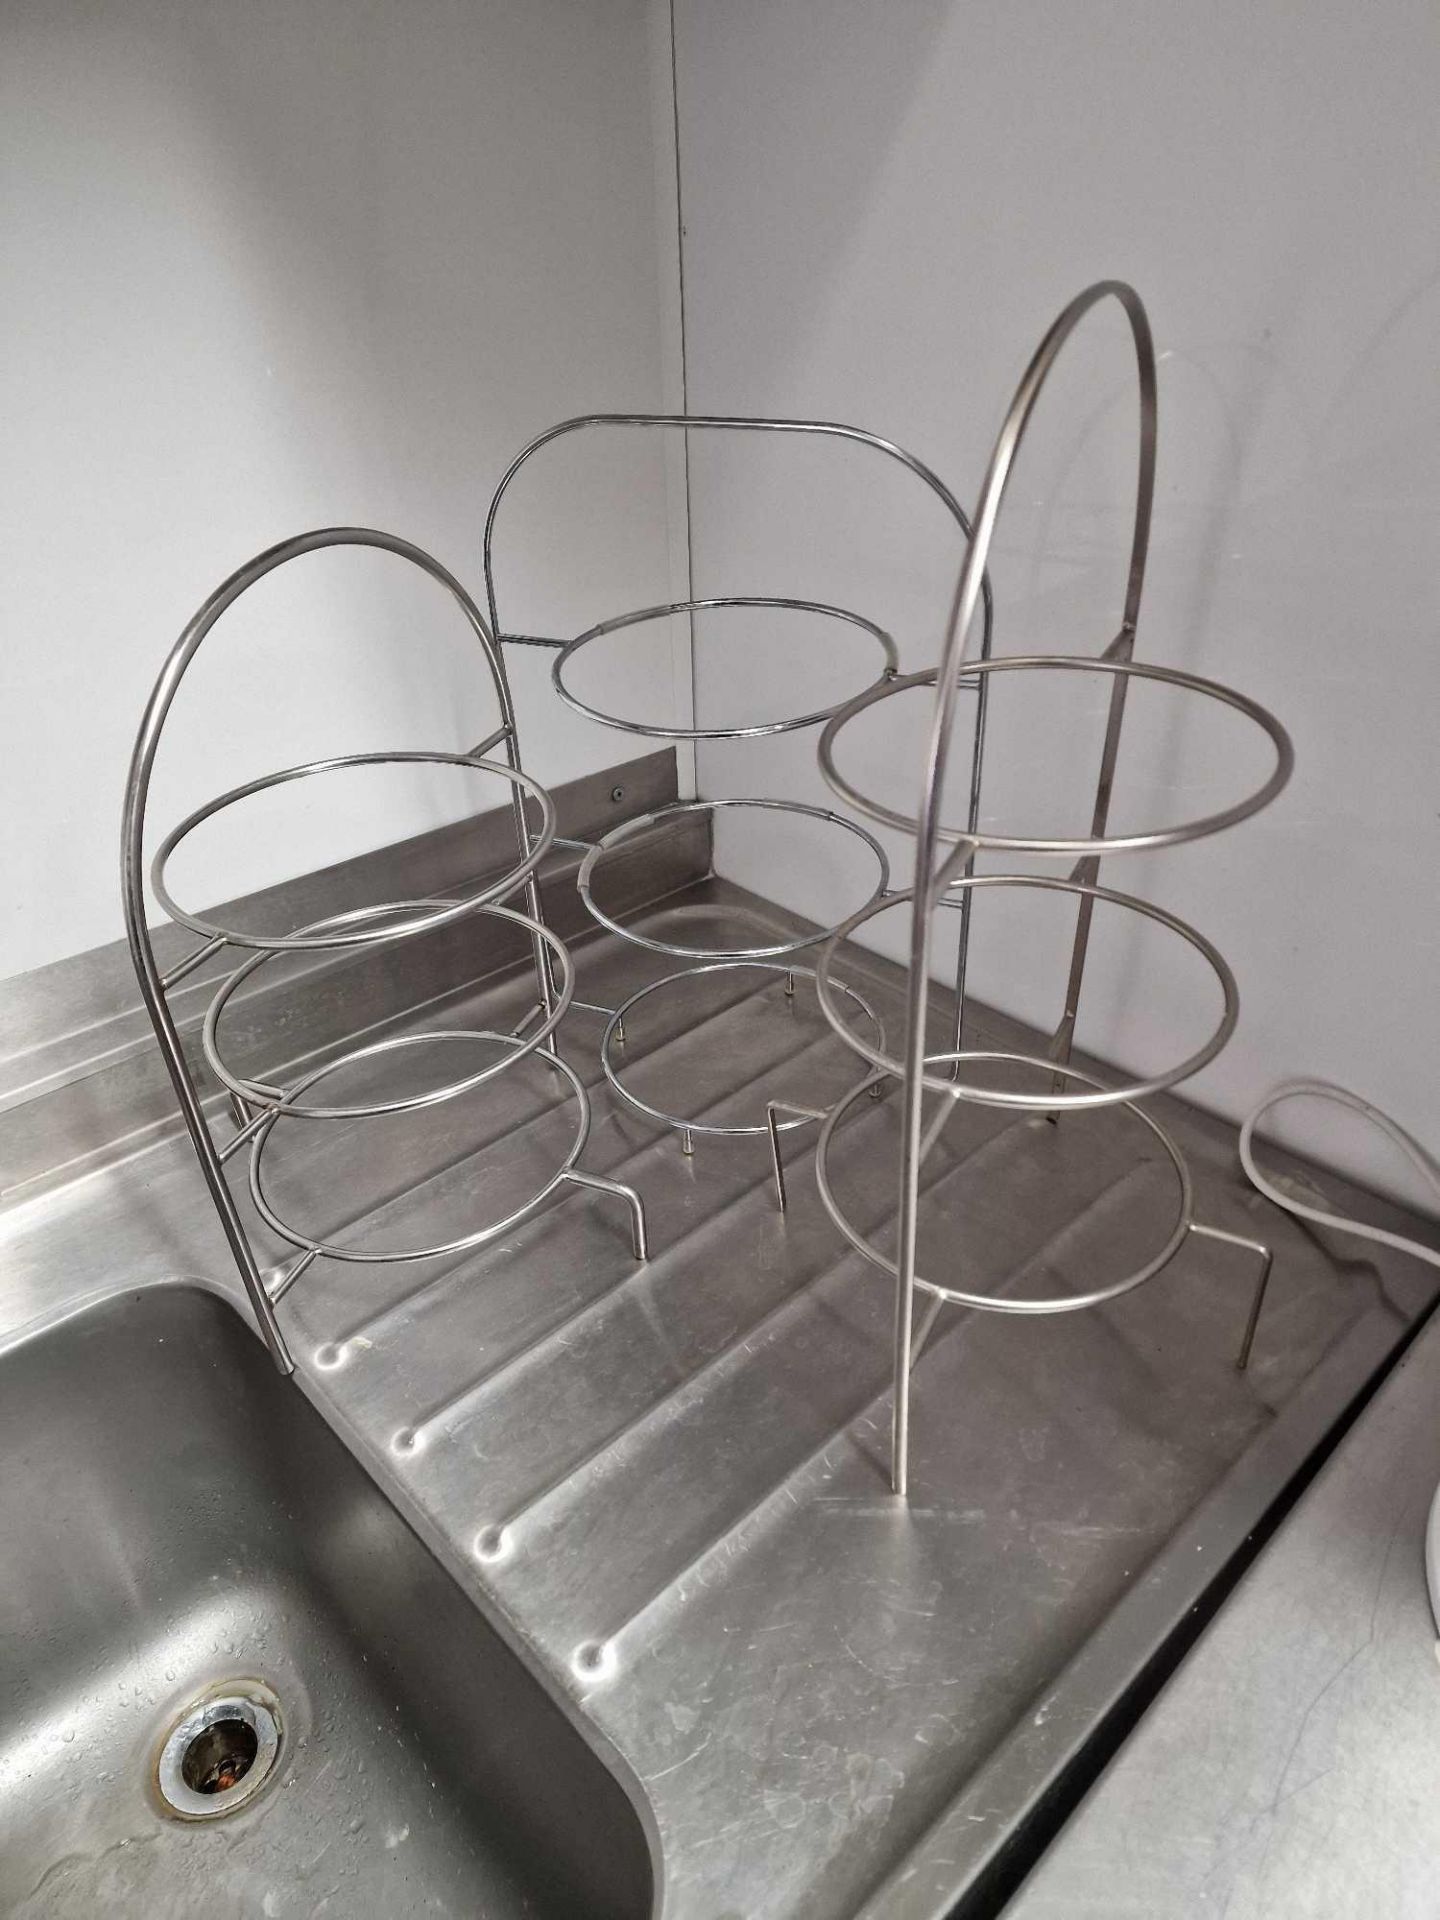 4 x Stainless Steel Afternoon Tea Plate Stands Upto 210mm Plate Size